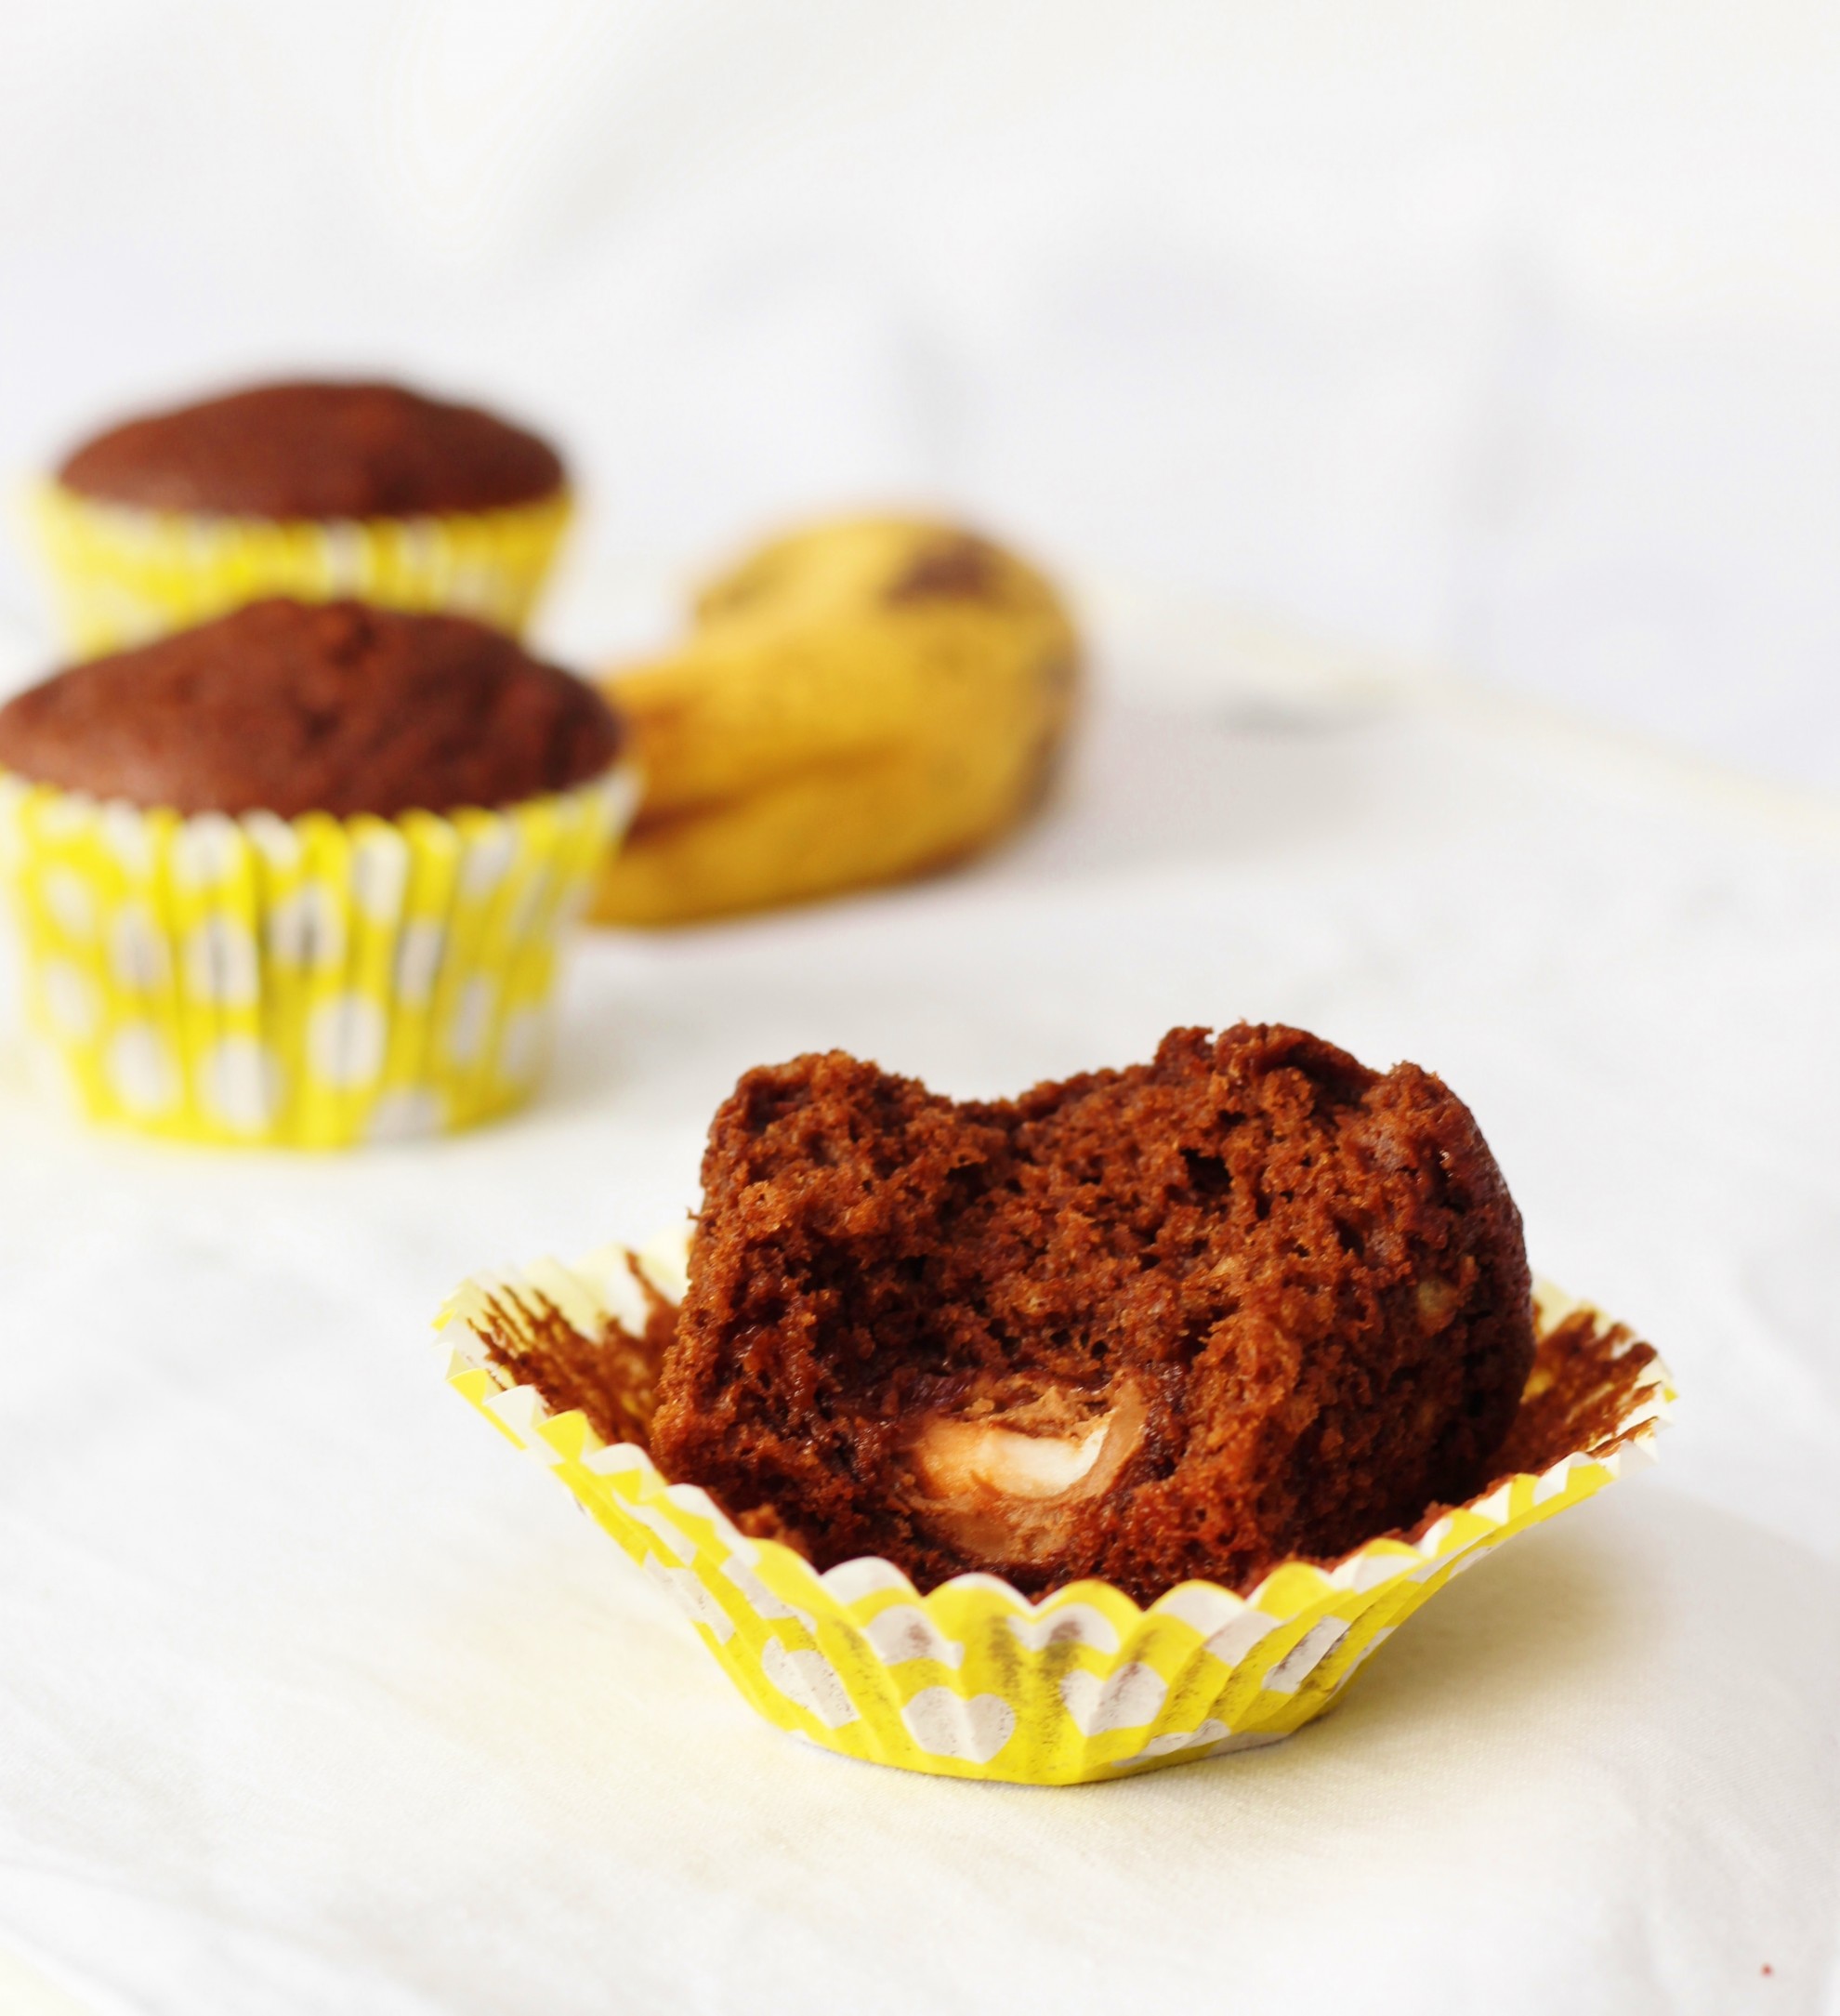 Chocolate and banana muffins with a creme egg surprise